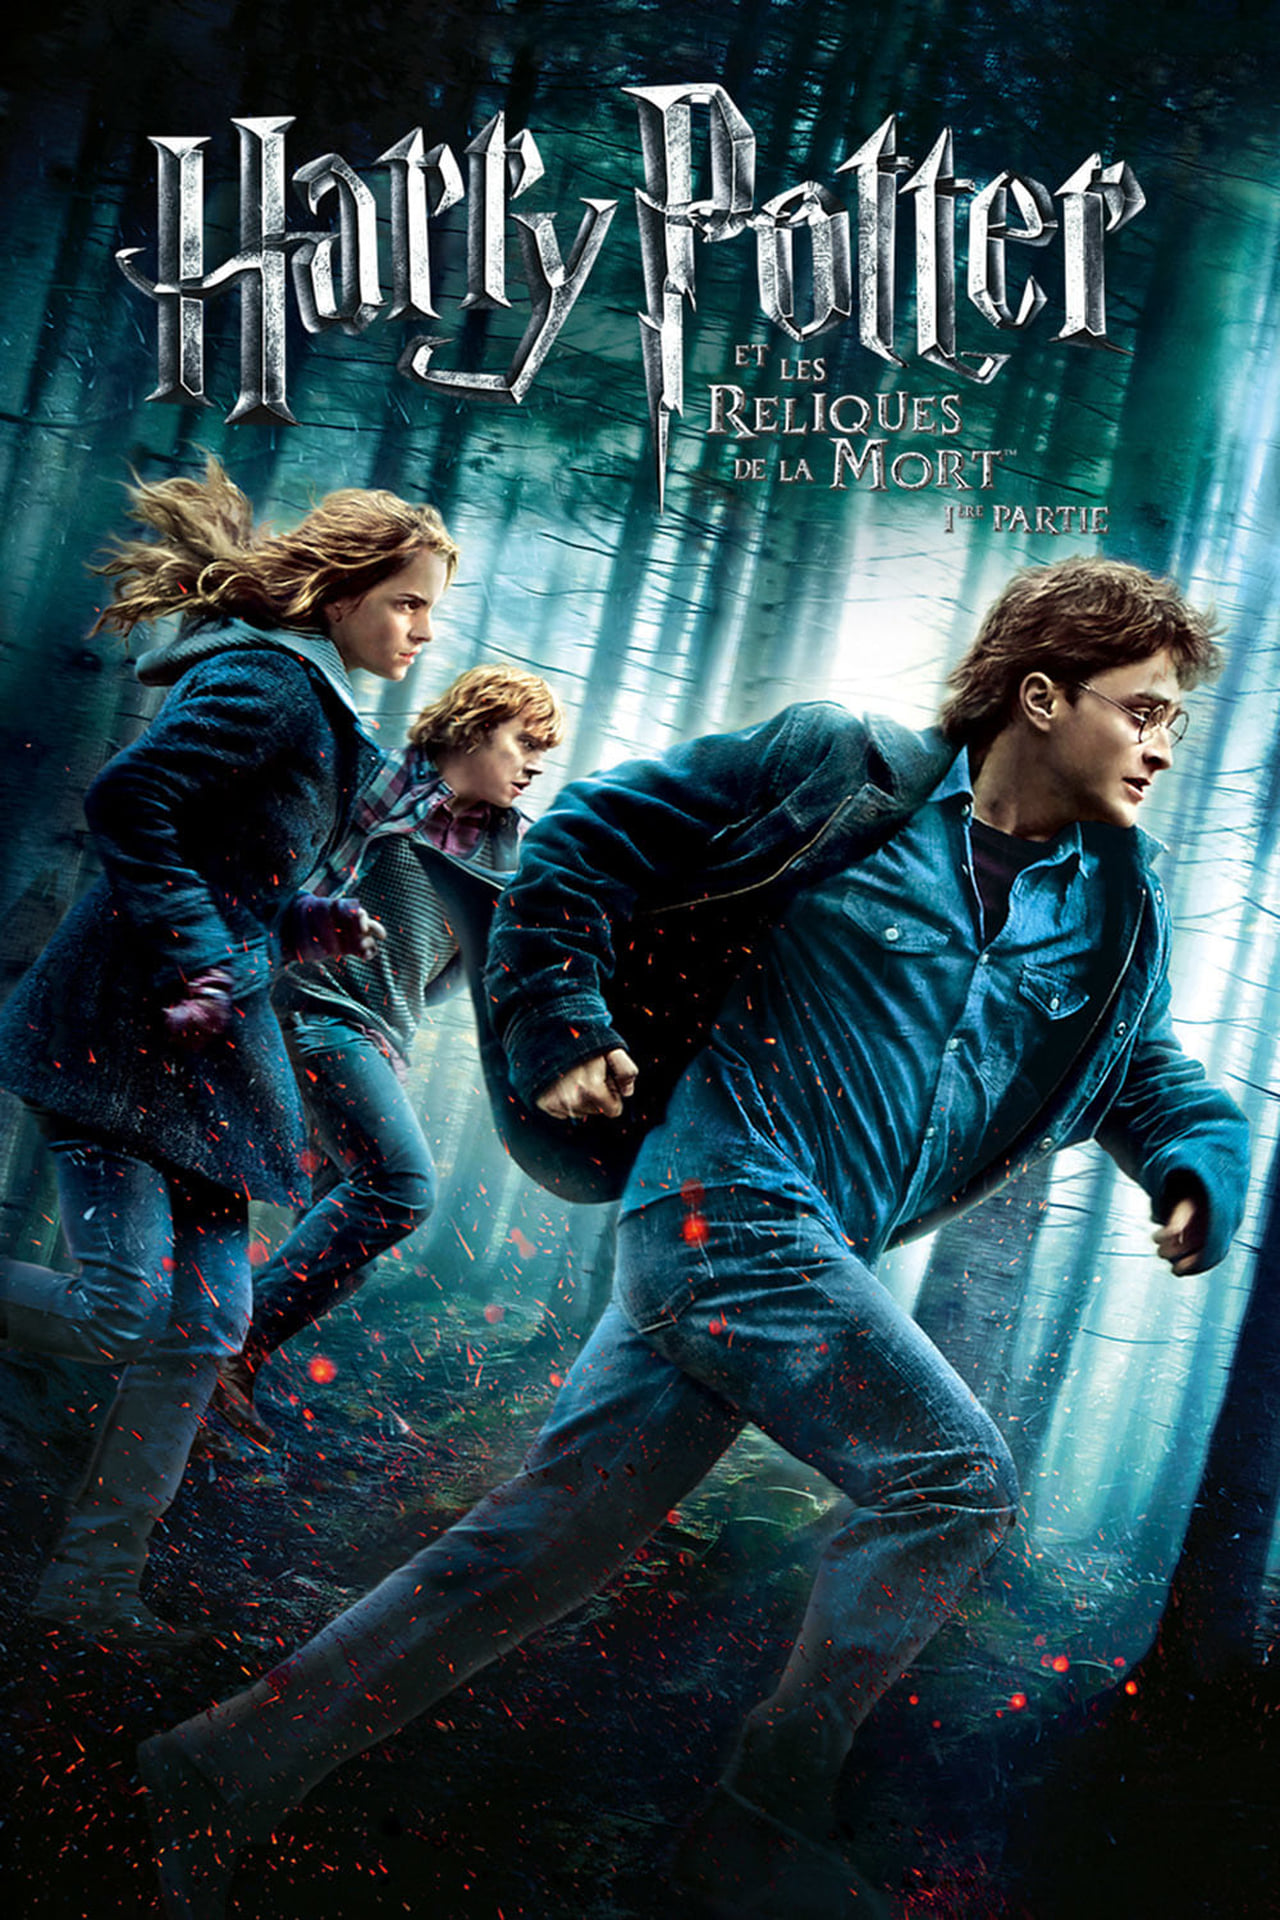 harry potter deathly hallows part 2 runtime